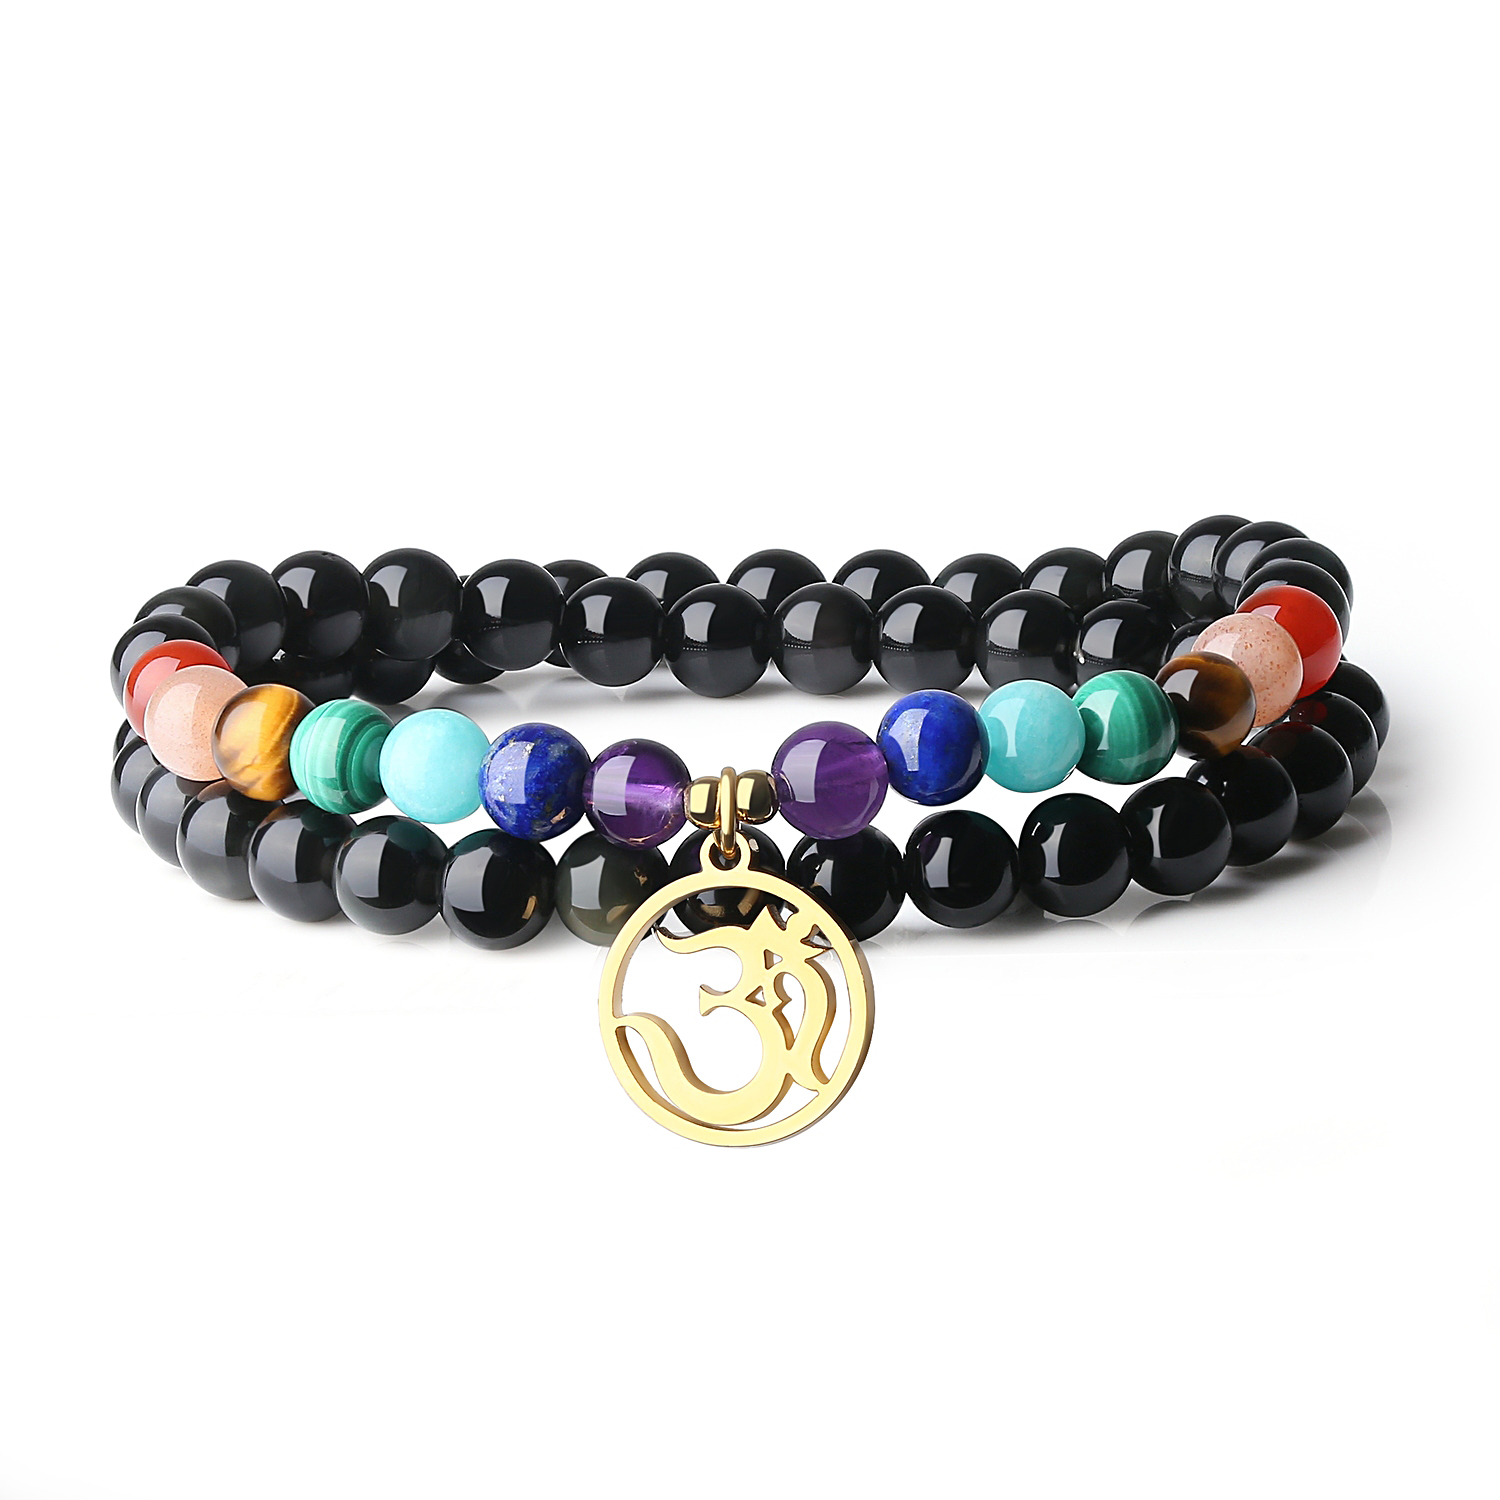 Buy Colourful Gemstone Healing Stylish Charm Bracelets for Men Women Boys  and Girls |Multi Color at Amazon.in